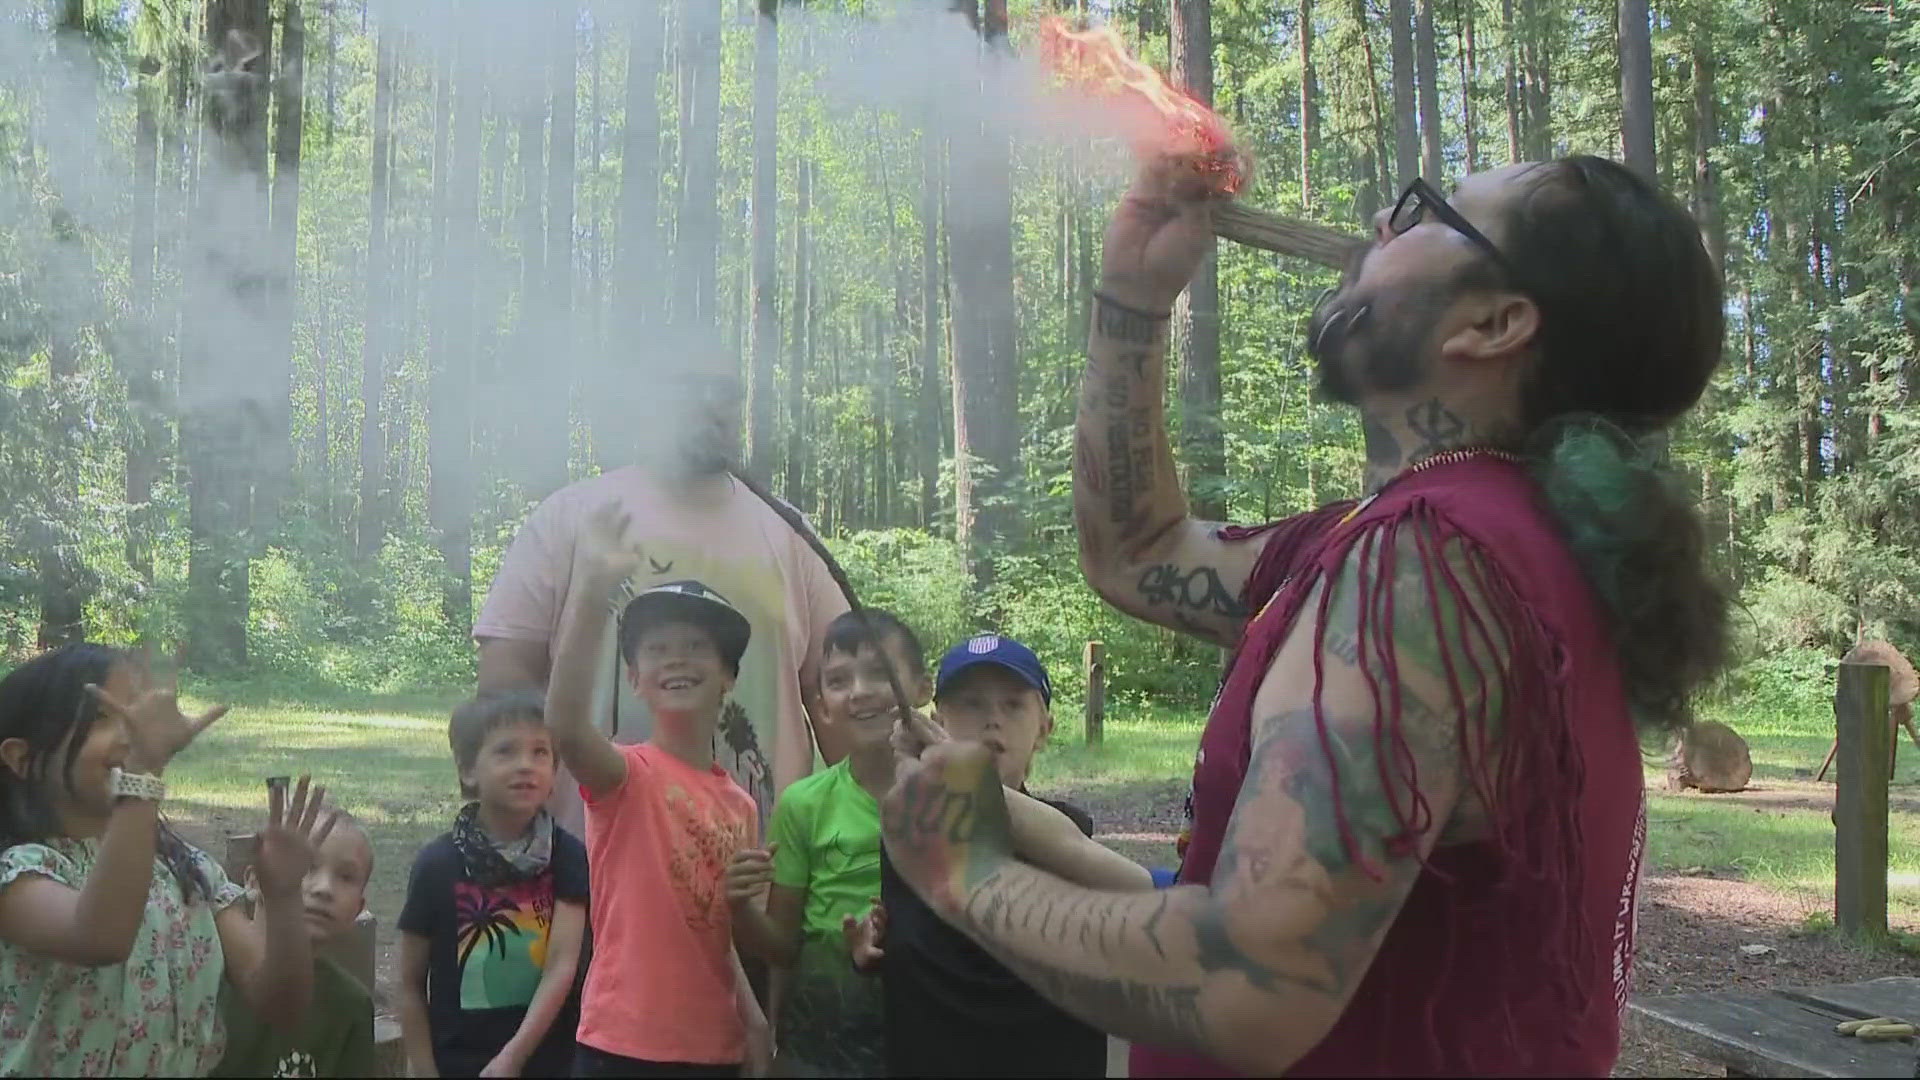 This week's Let's Get Out There heads over to Trackers Earth summer camp and takes a peek at how they're teaching kids important wilderness skills.